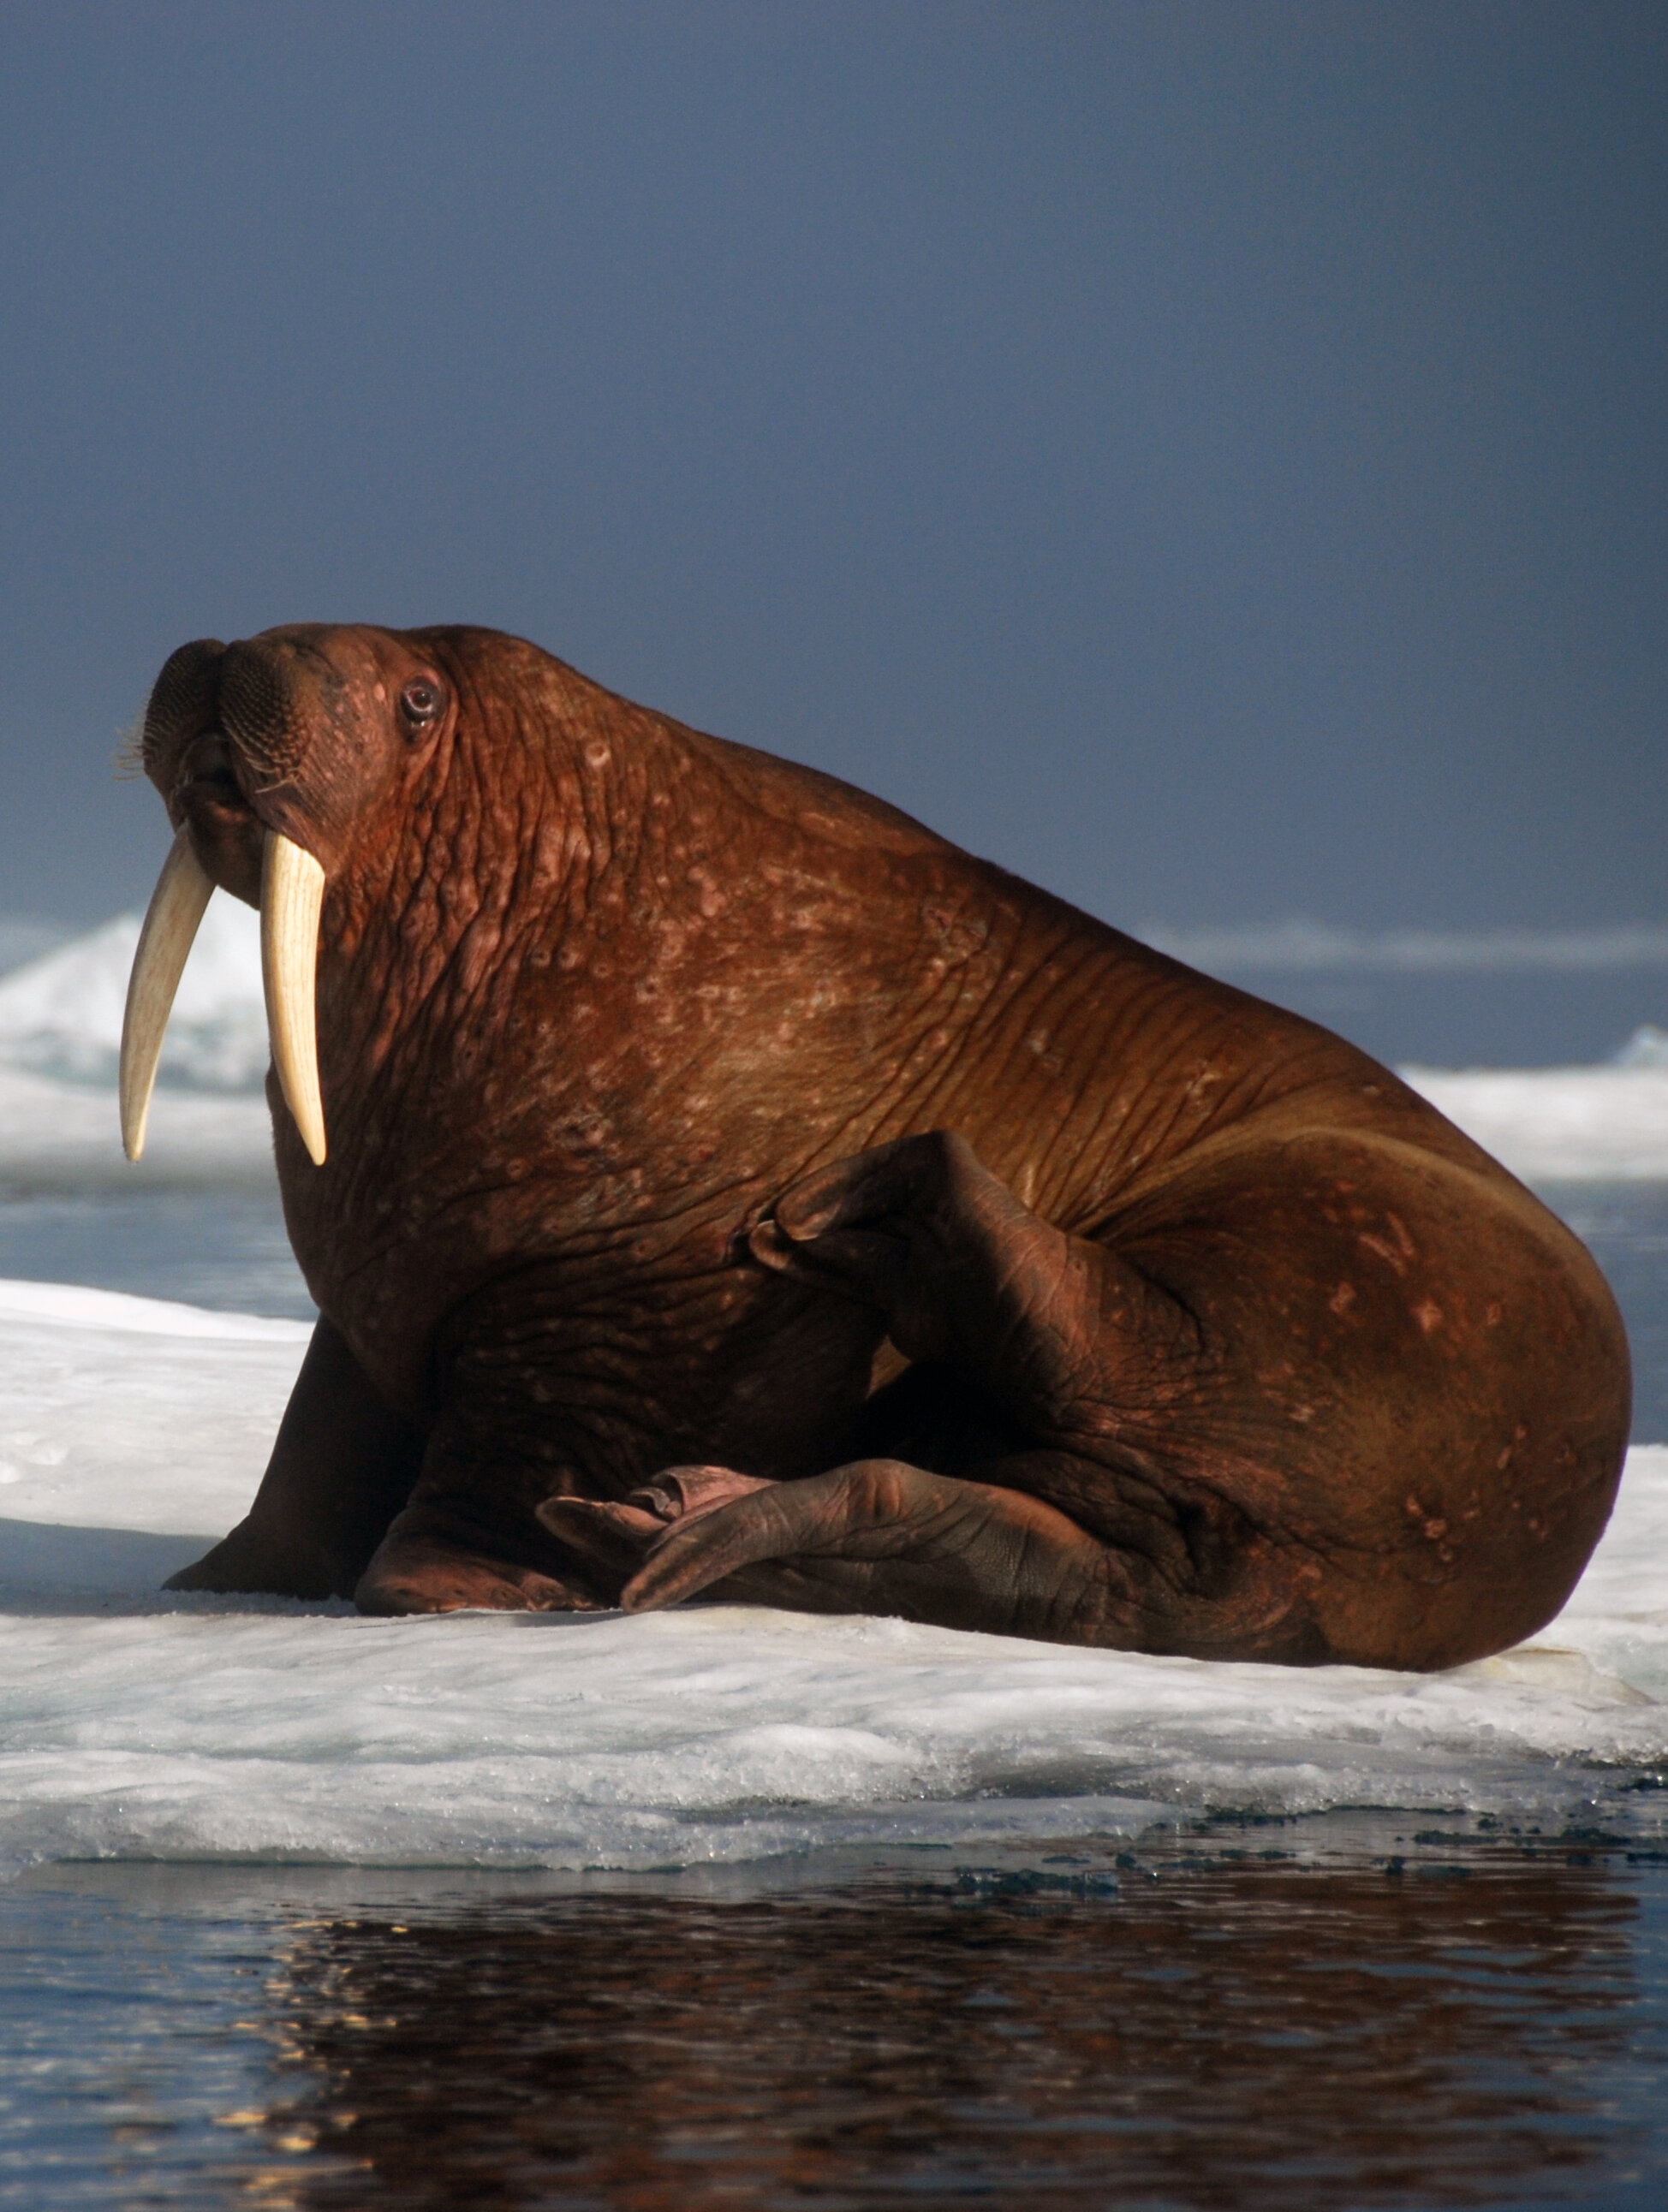 Female and young walruses depend on disappearing Arctic sea ice for food sources